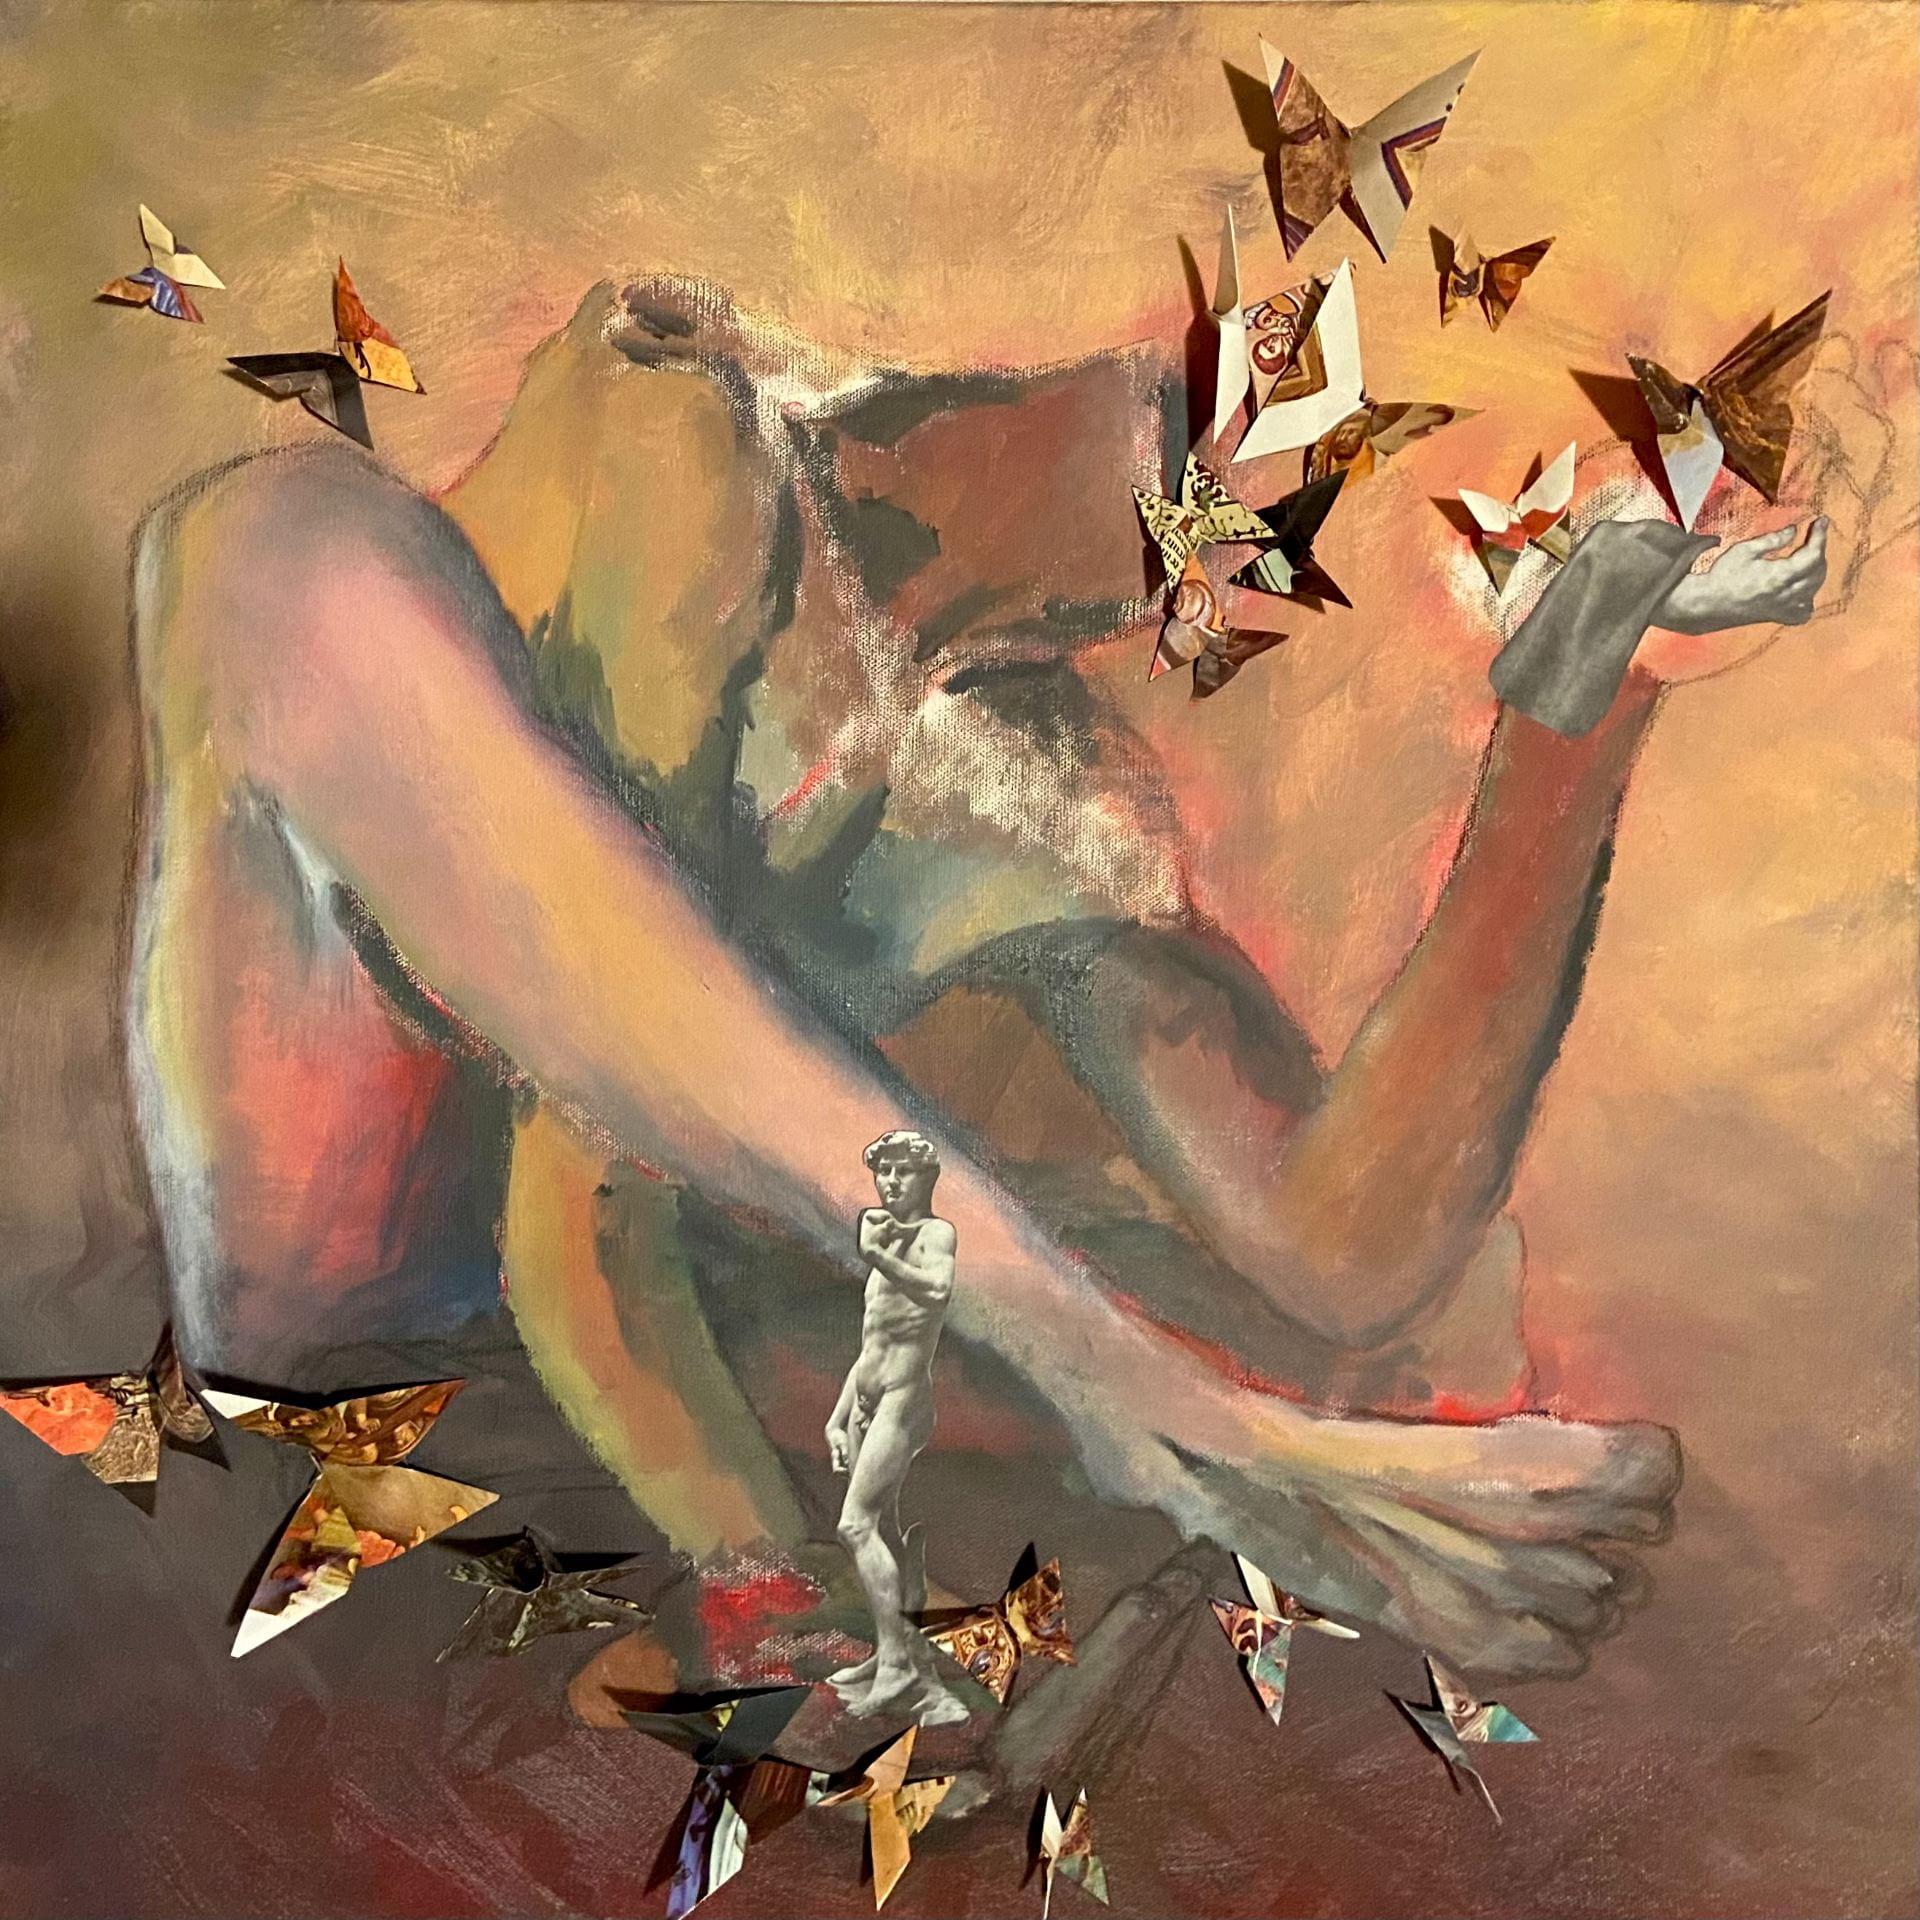 Surreal painting of a body seated with legs loosely crossed. One arm threaded under a leg holds a statue of David in the hand. The other arm, resting on a knee, holds up the hand from a statue. A group of butterflies replaces the body's head, and circles around each hand.